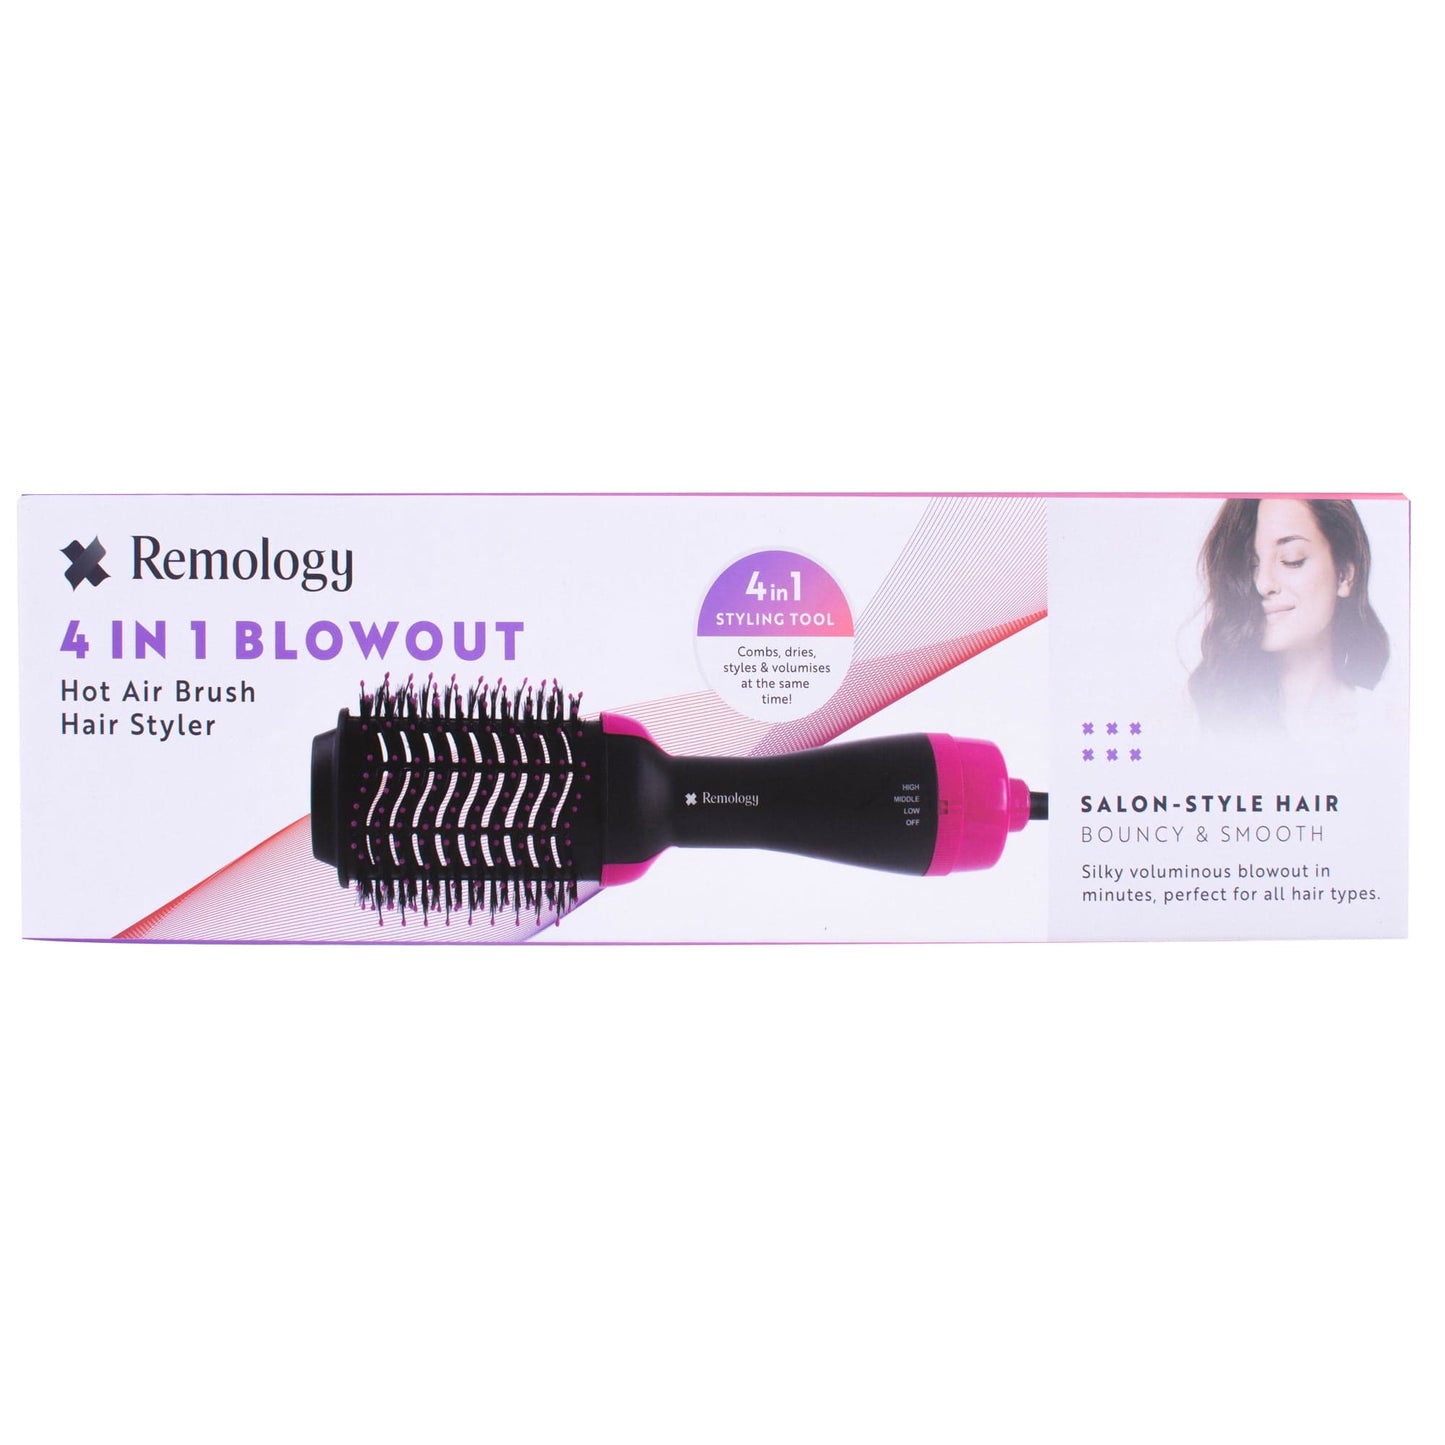 Remology personal care Remology 4 in 1 Blowout Hot Air Brush Hair Styler